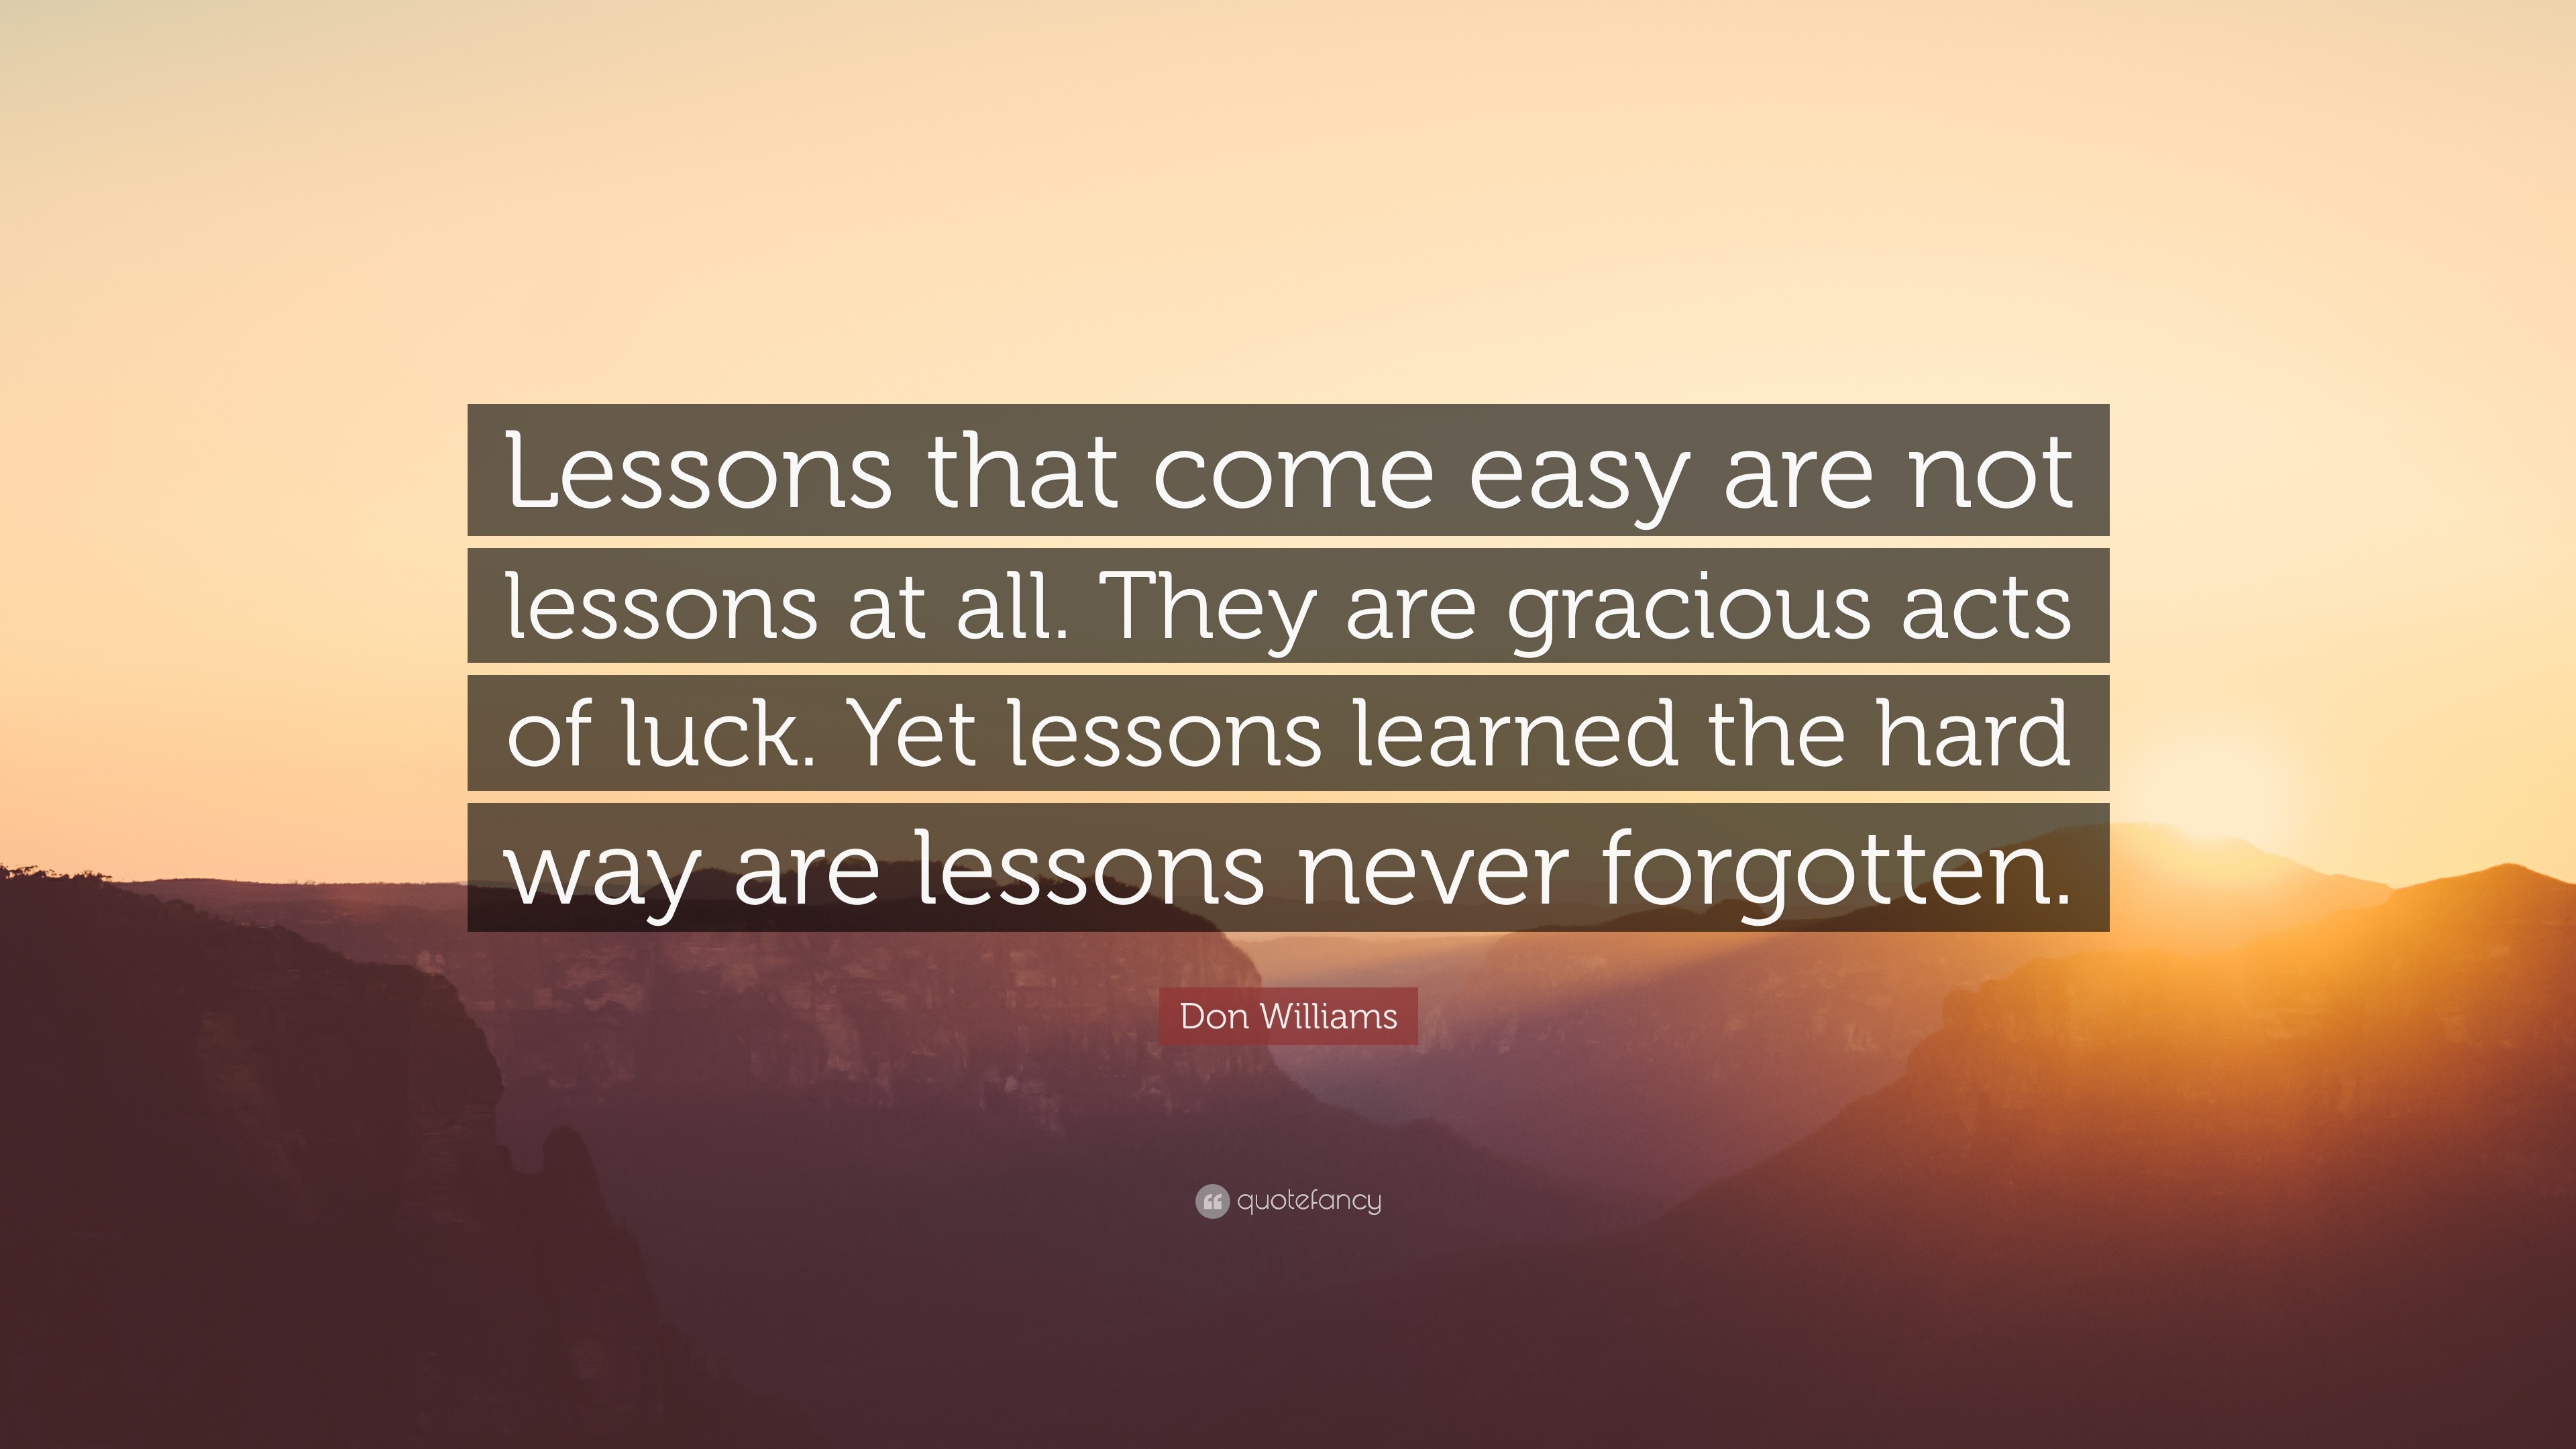 Learning lessons – the hard way!